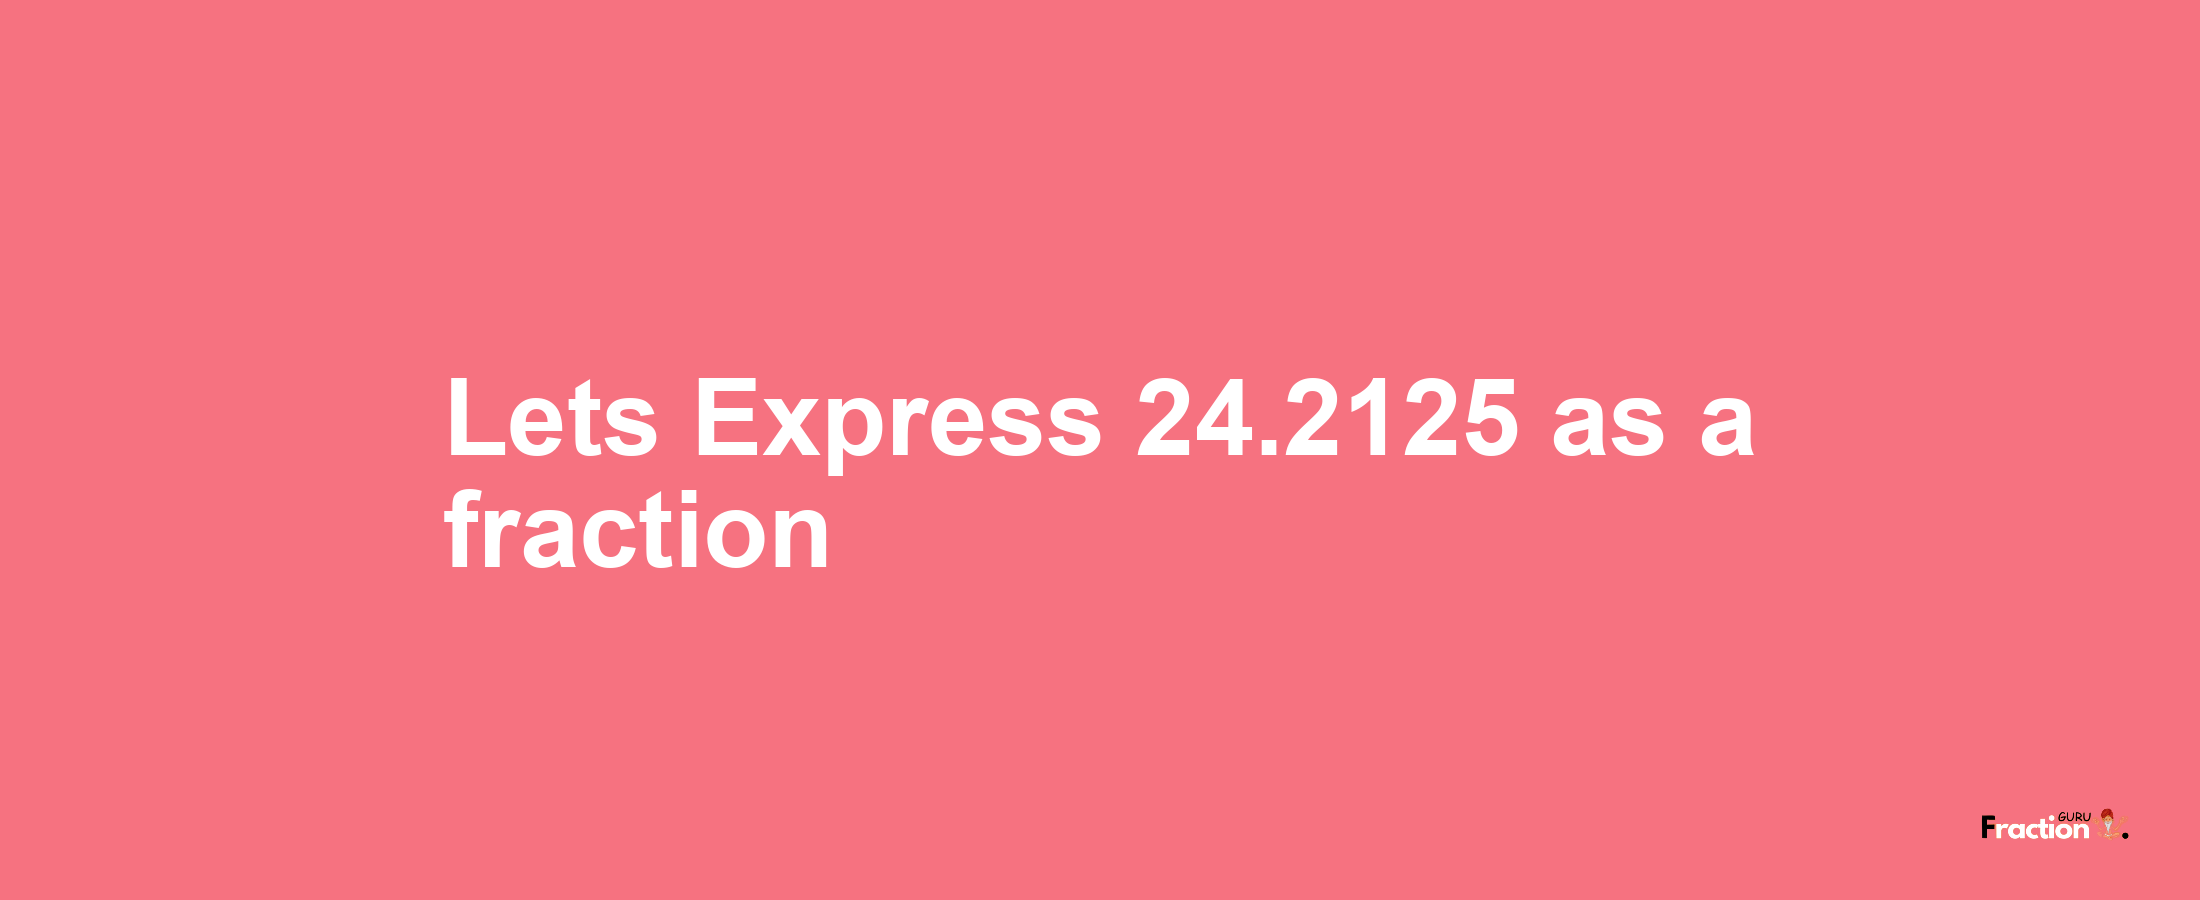 Lets Express 24.2125 as afraction